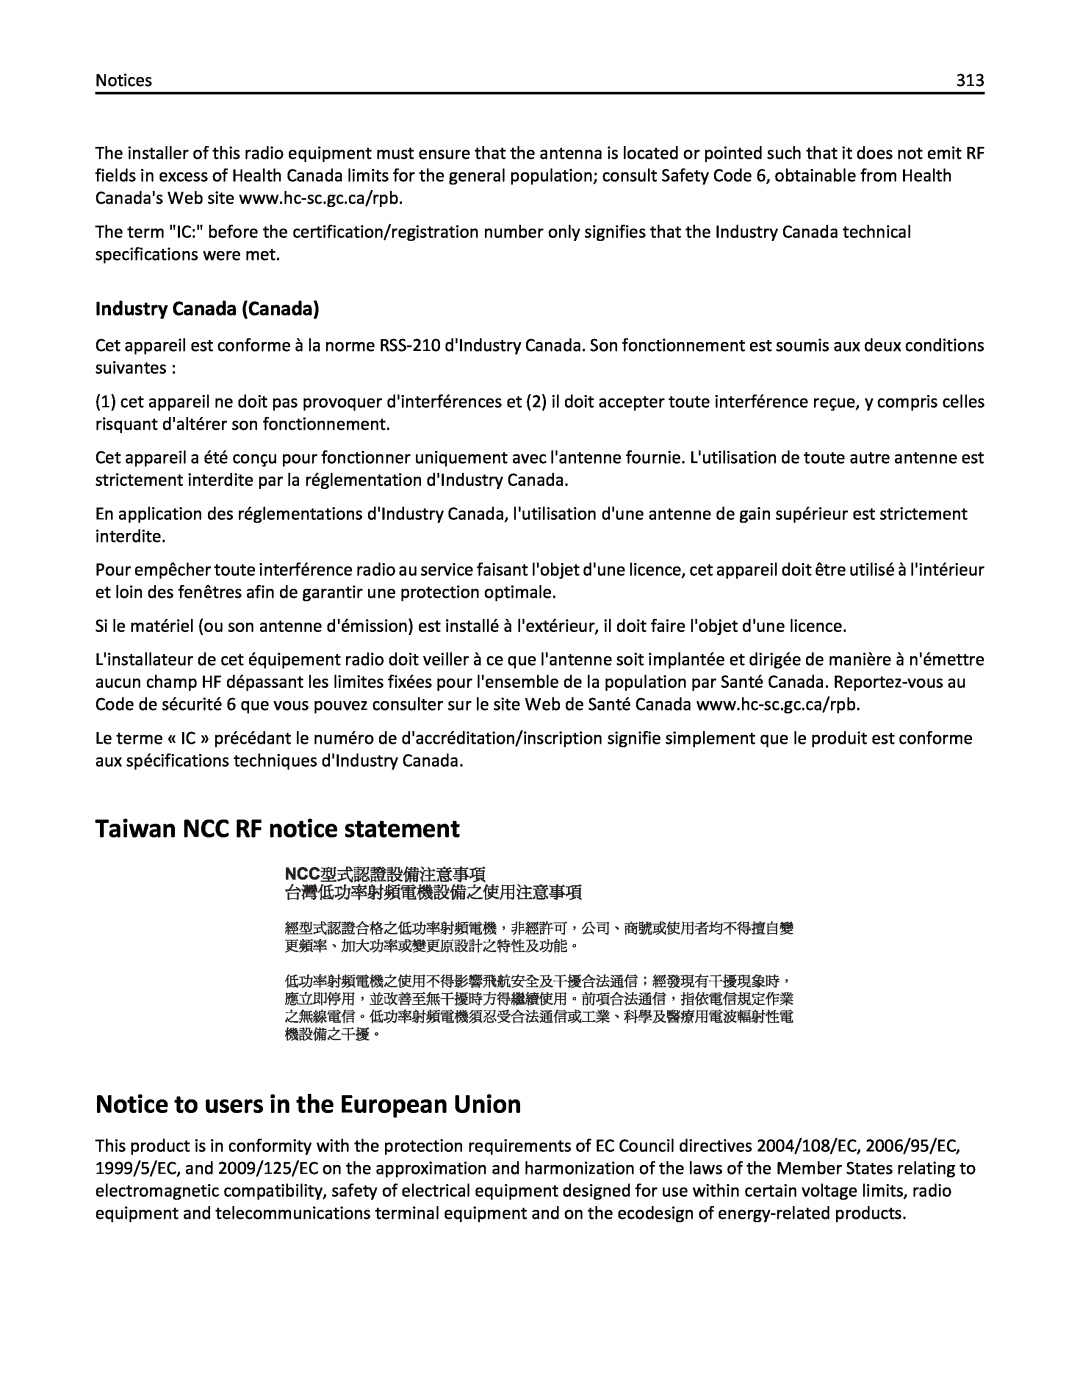 Lexmark MX410, 470, 35S5701 Taiwan NCC RF notice statement Notice to users in the European Union, Industry Canada Canada 